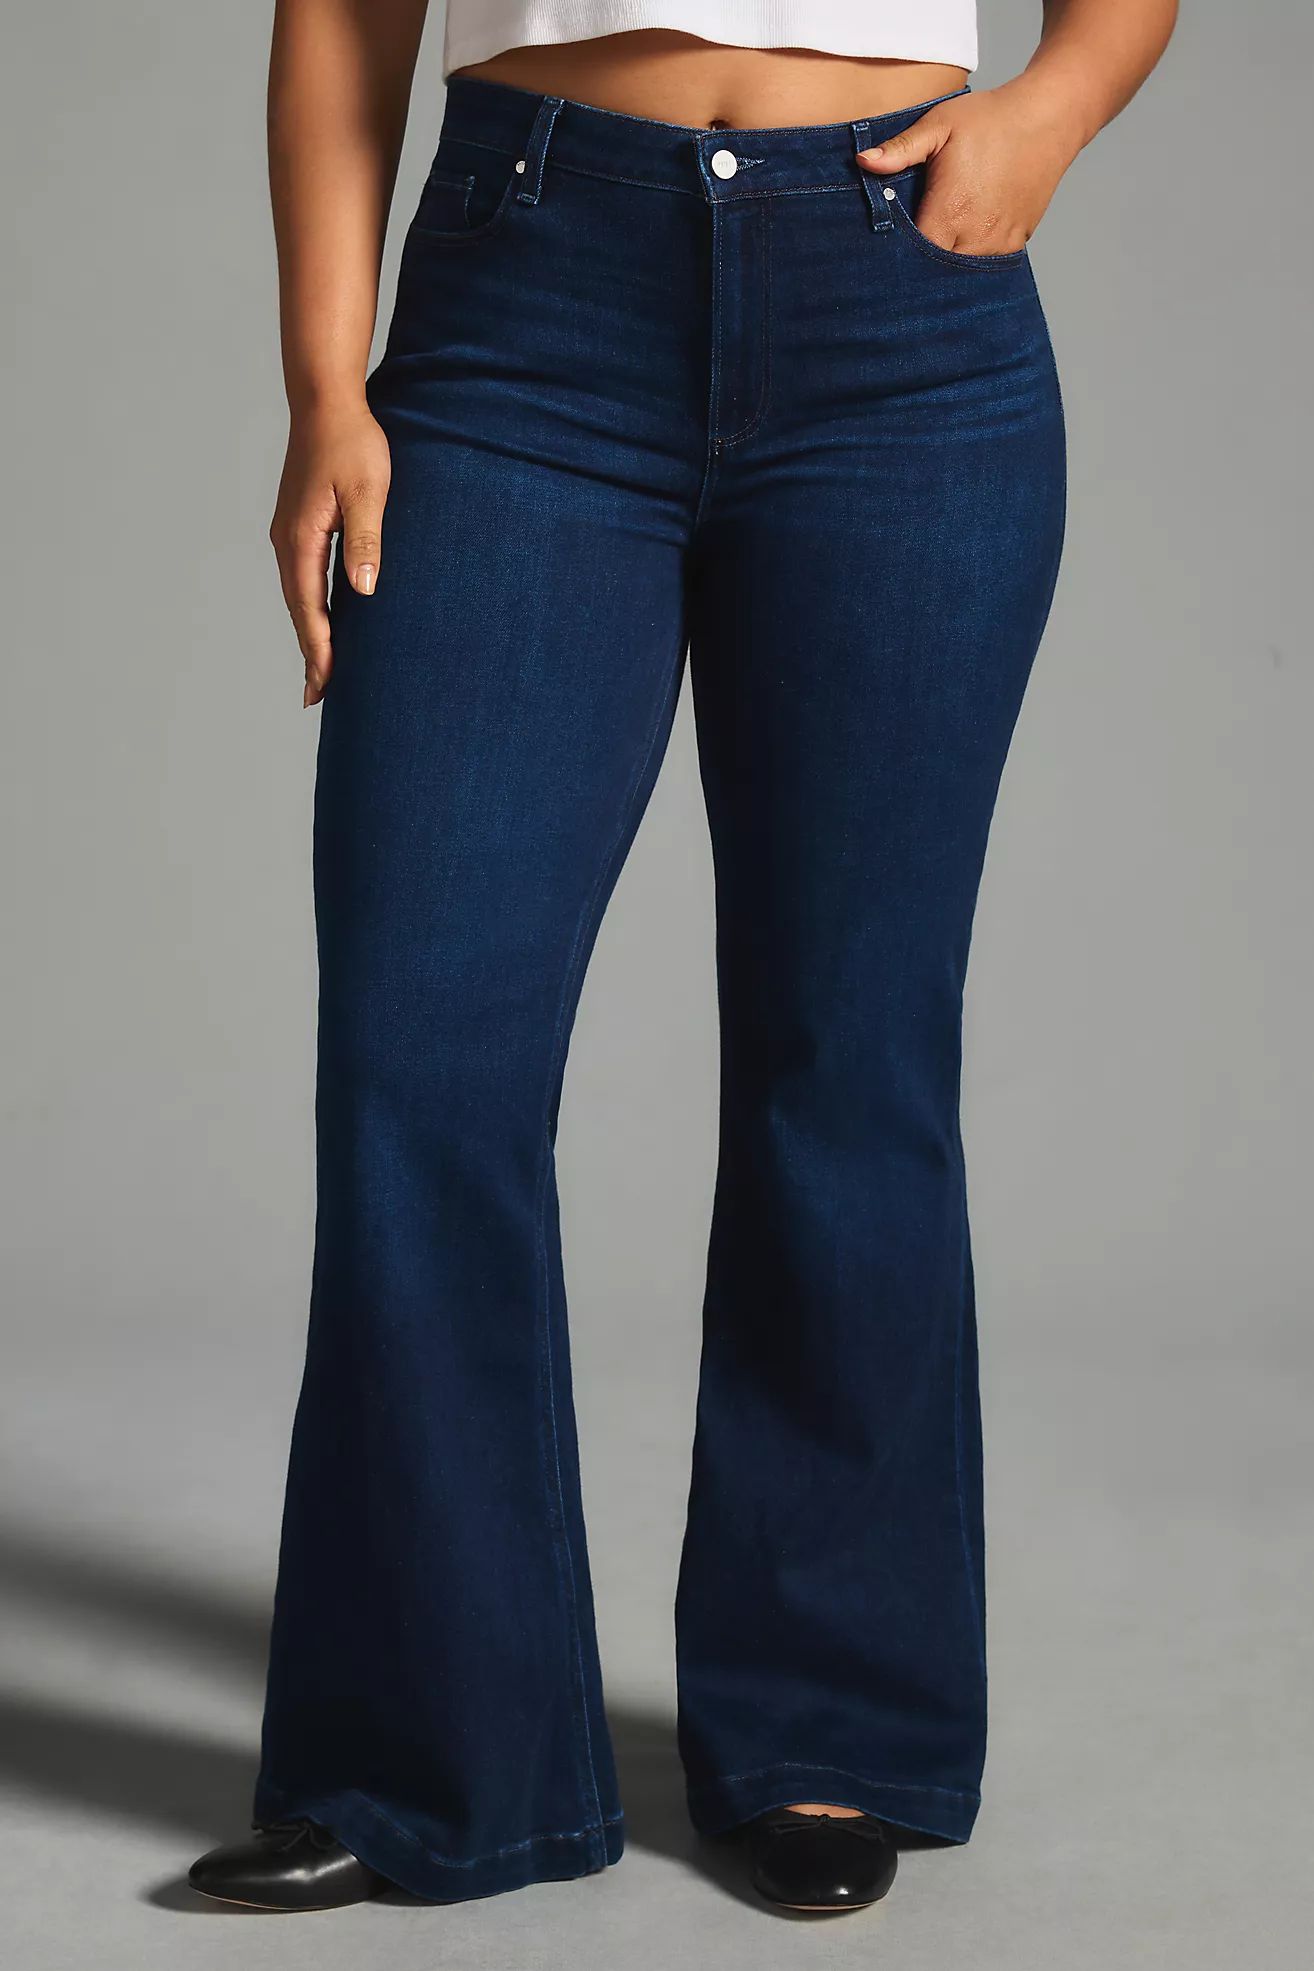 PAIGE Genevieve High-Rise Flare Jeans | Anthropologie (US)